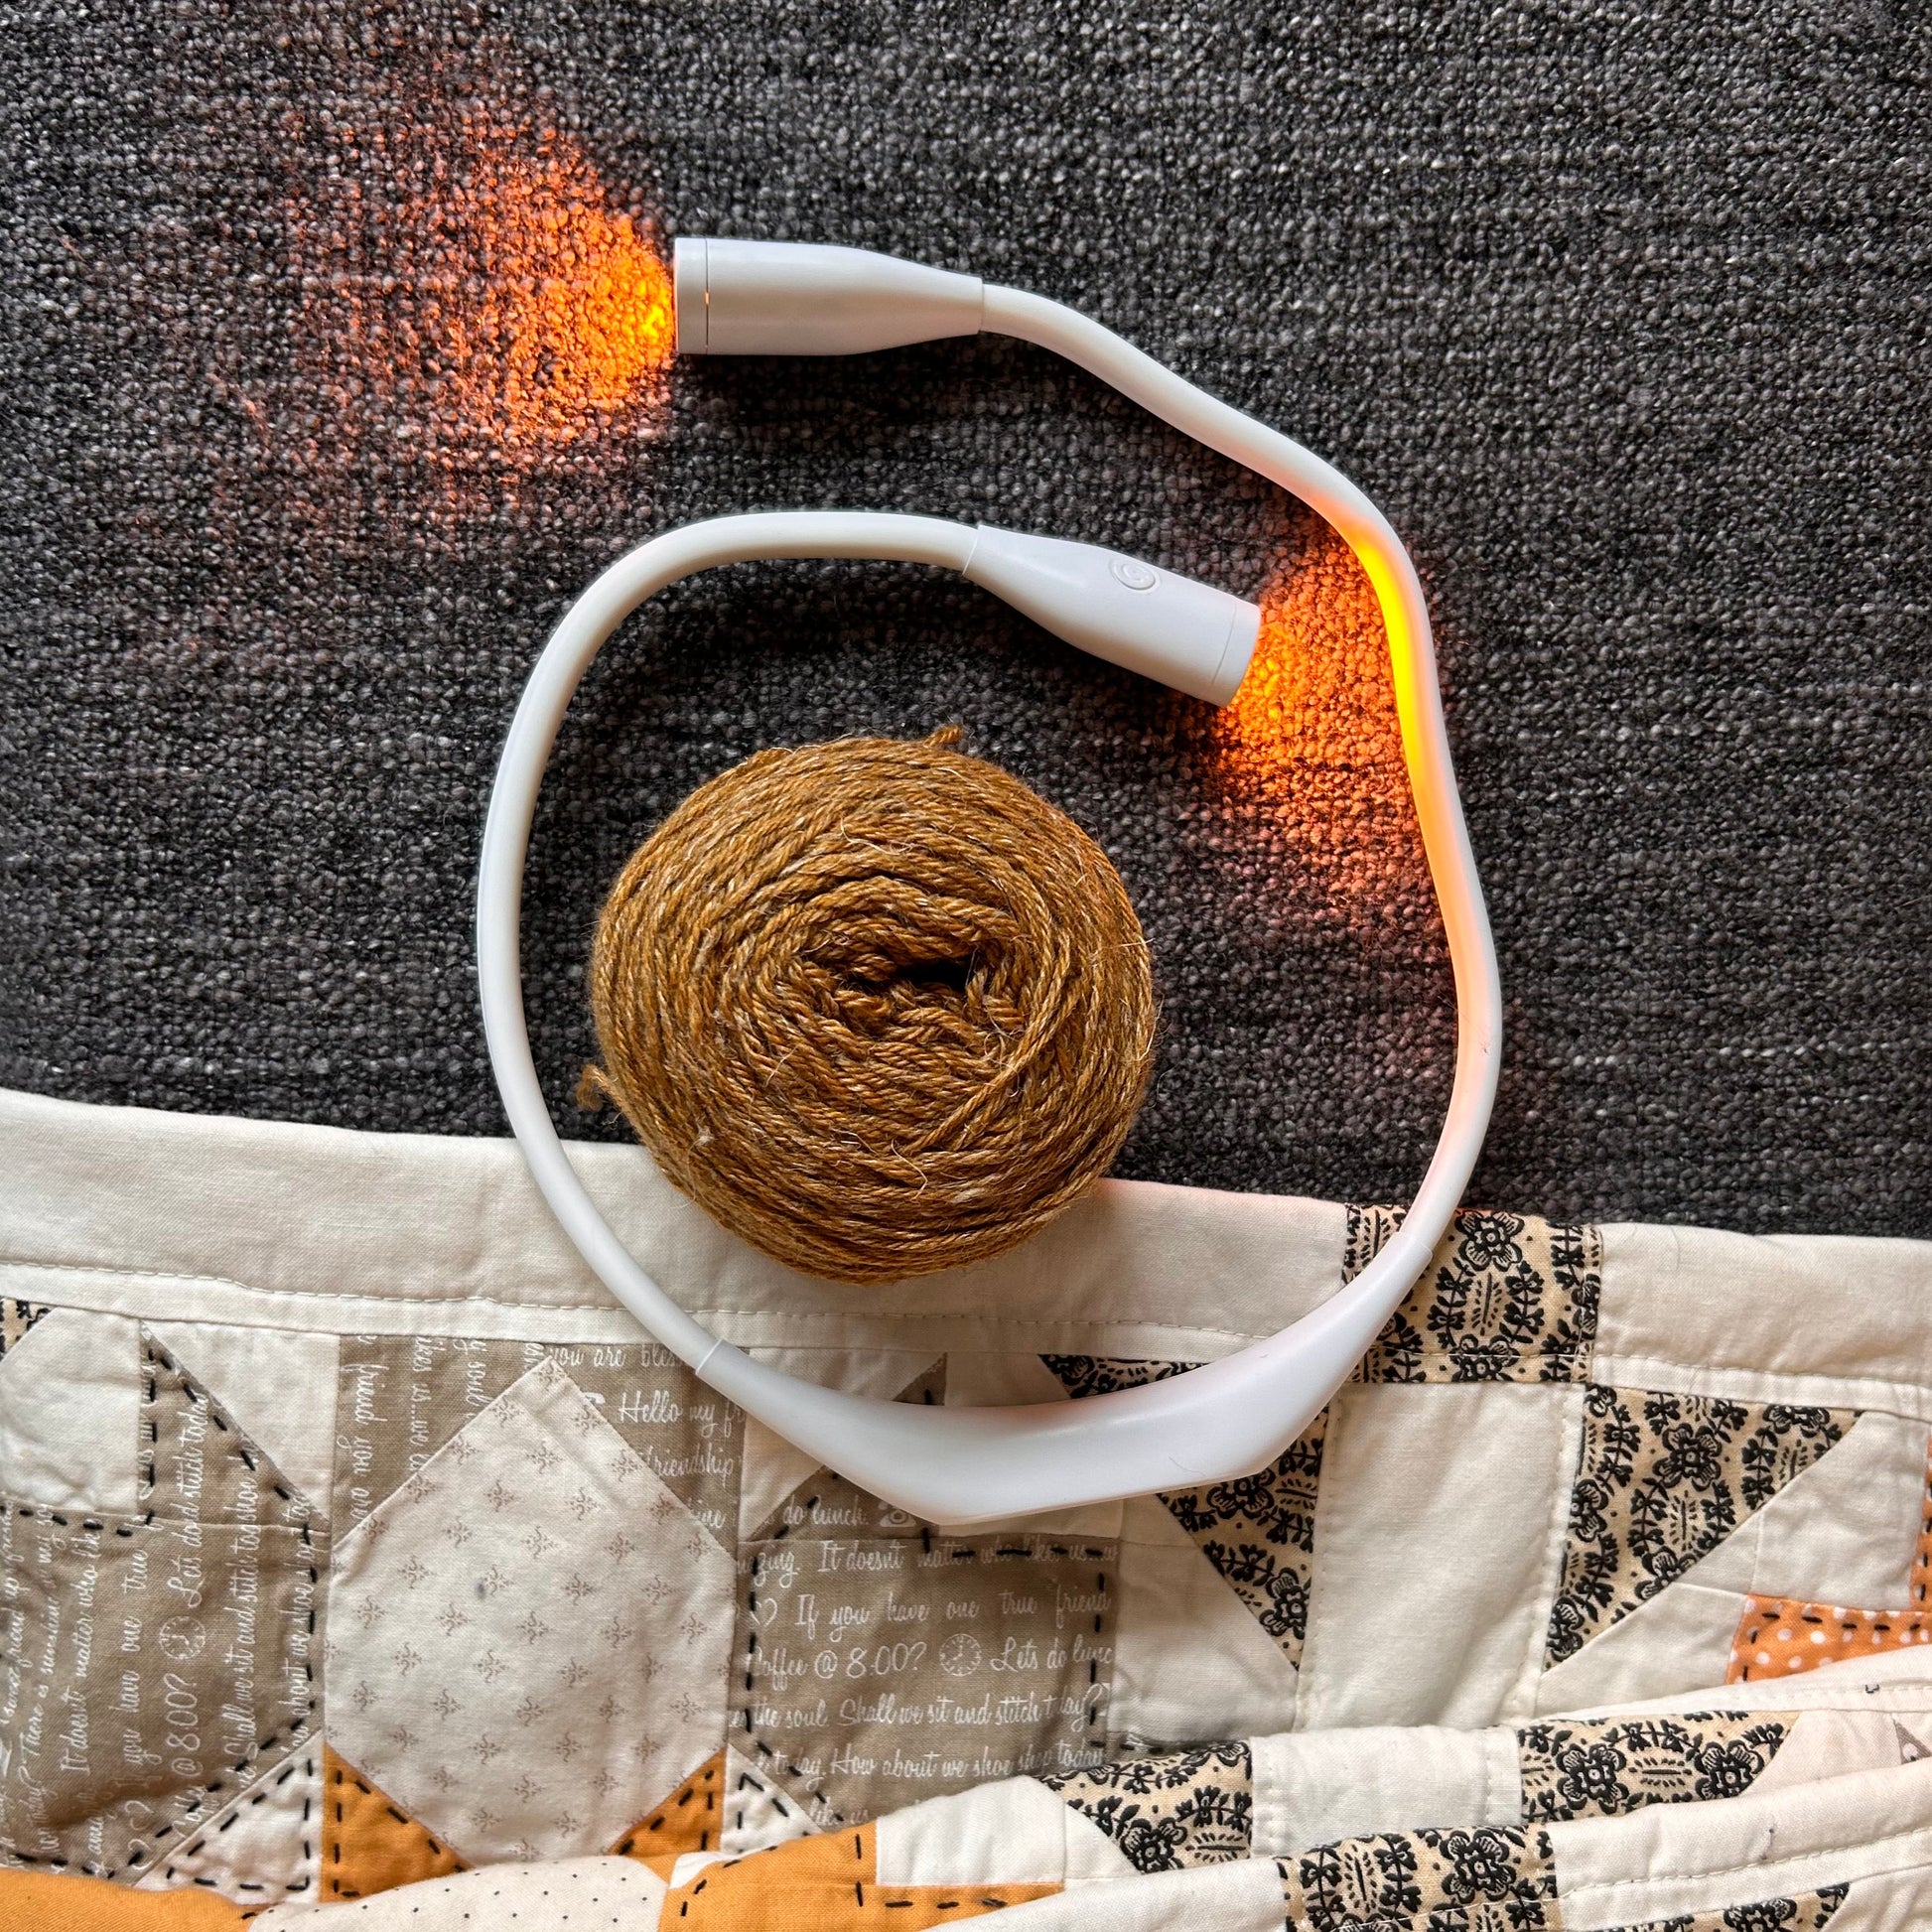 Our Review of the Lumos & Lumos Knitting Light